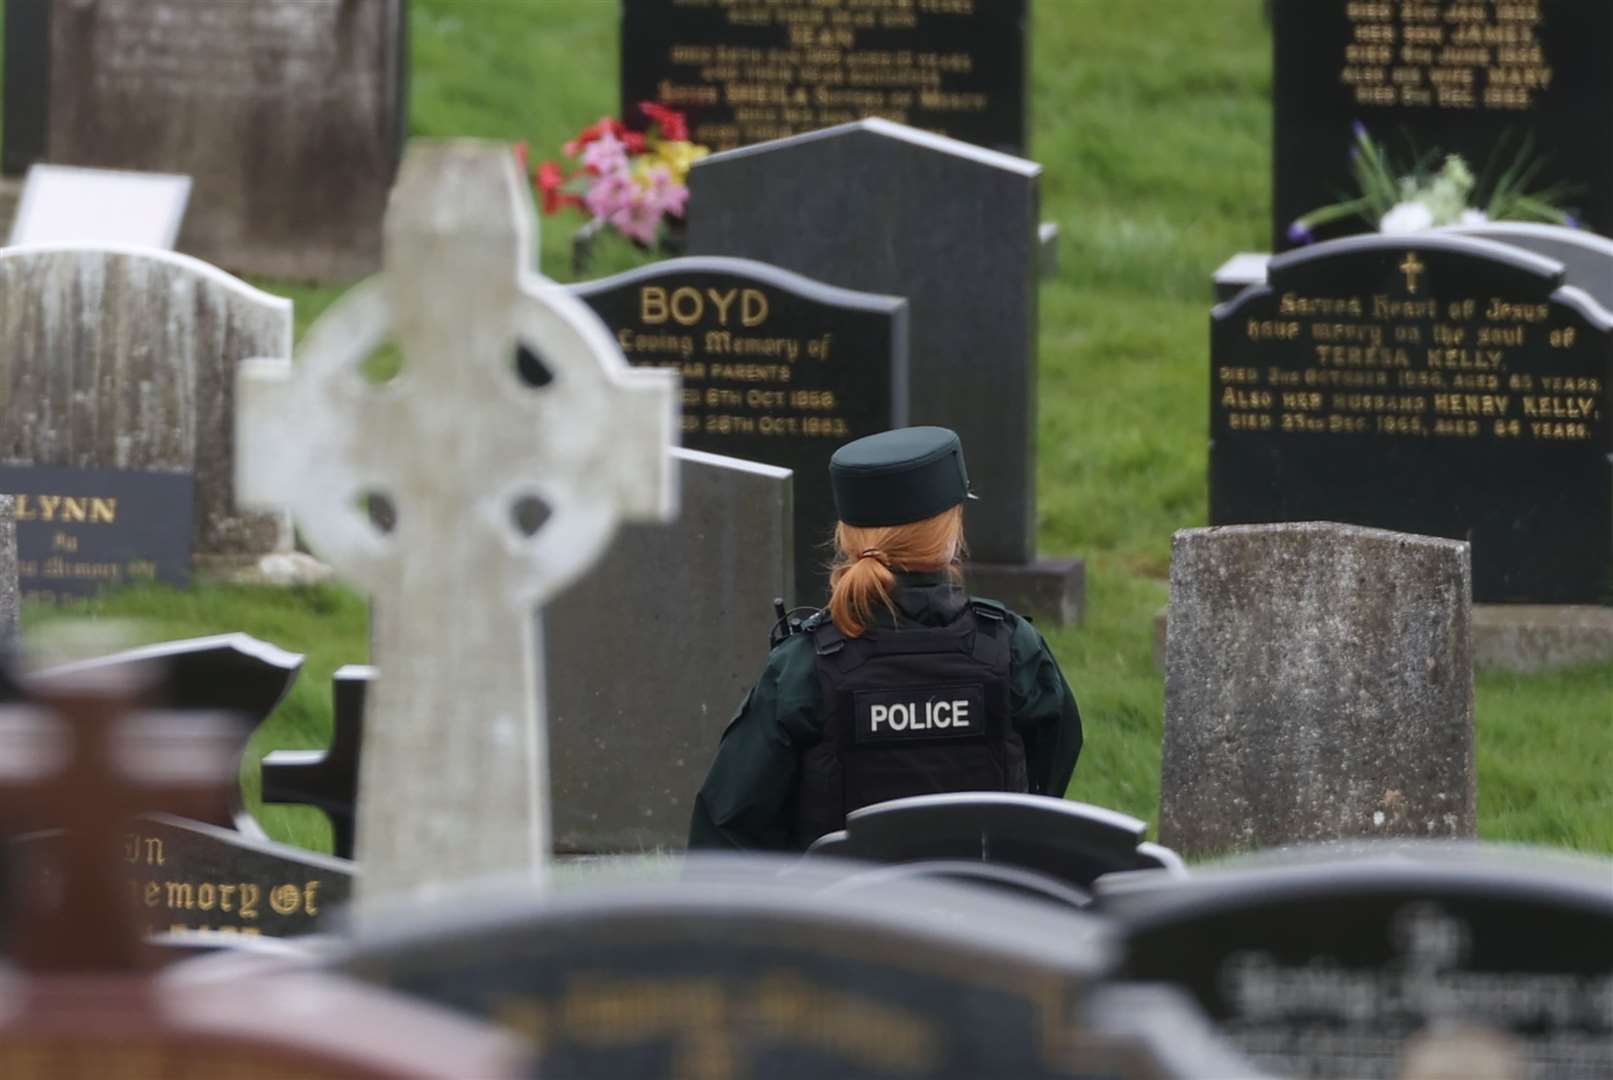 A PSNI officer inside the cemetery on Tuesday (Liam McBurney/PA)